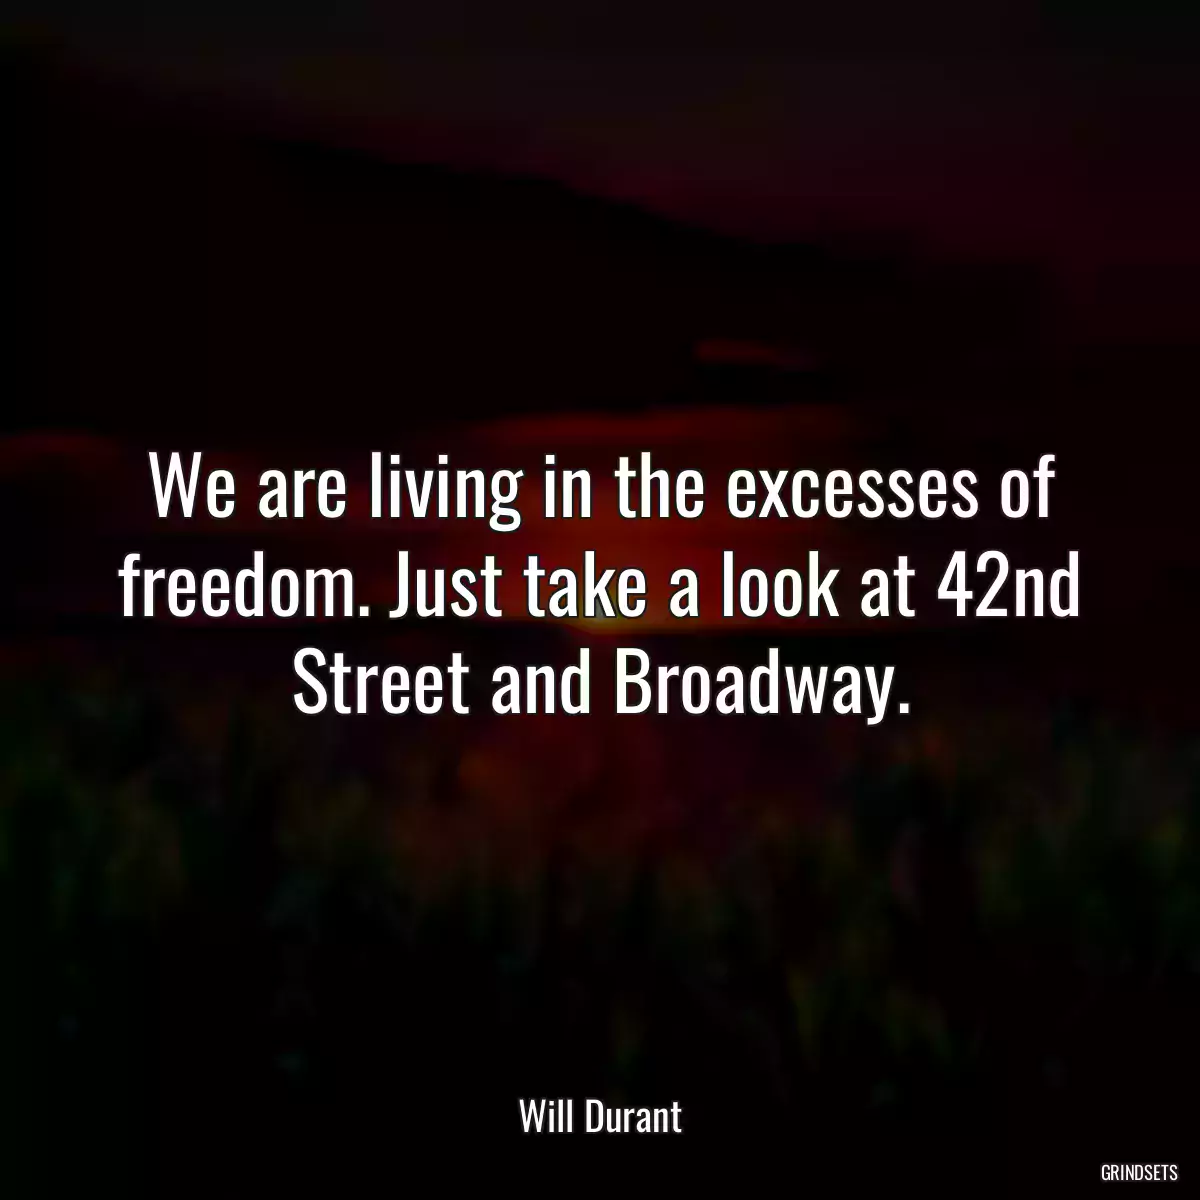 We are living in the excesses of freedom. Just take a look at 42nd Street and Broadway.